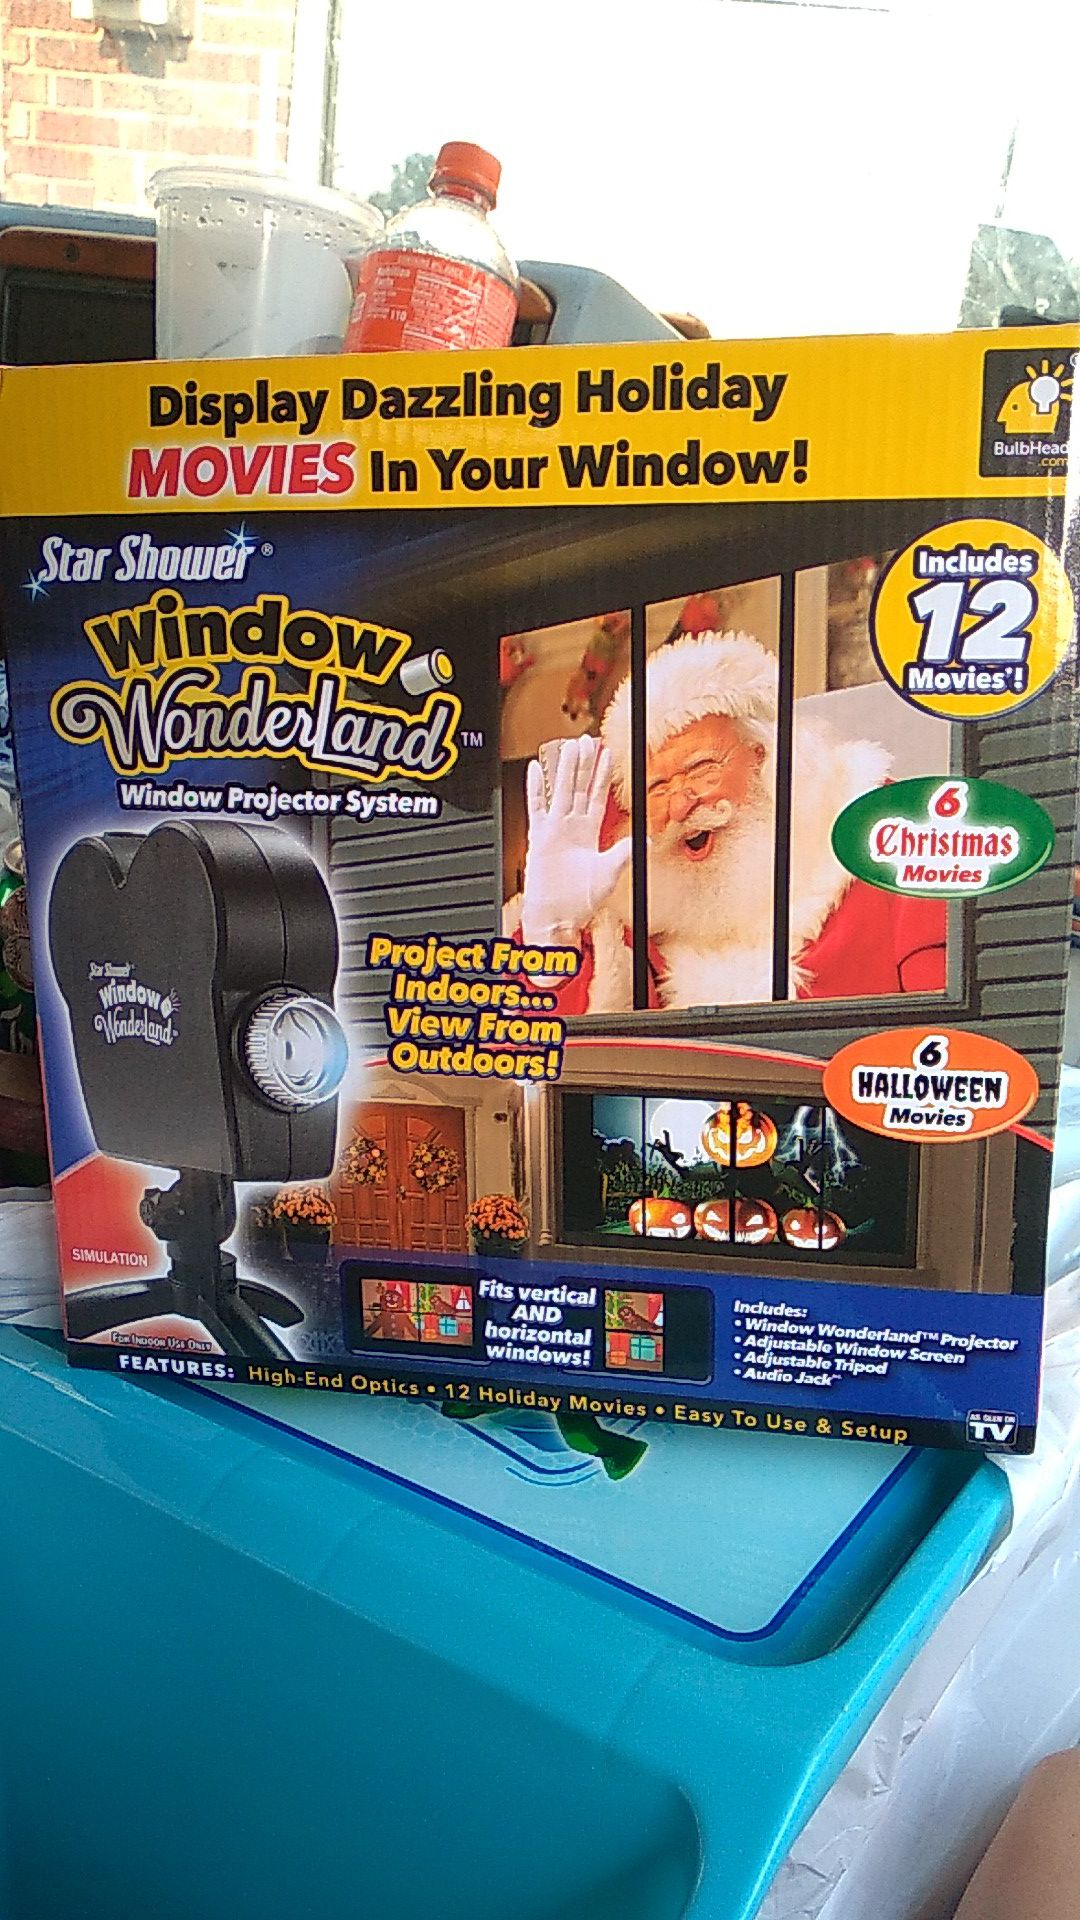 Window Projector System